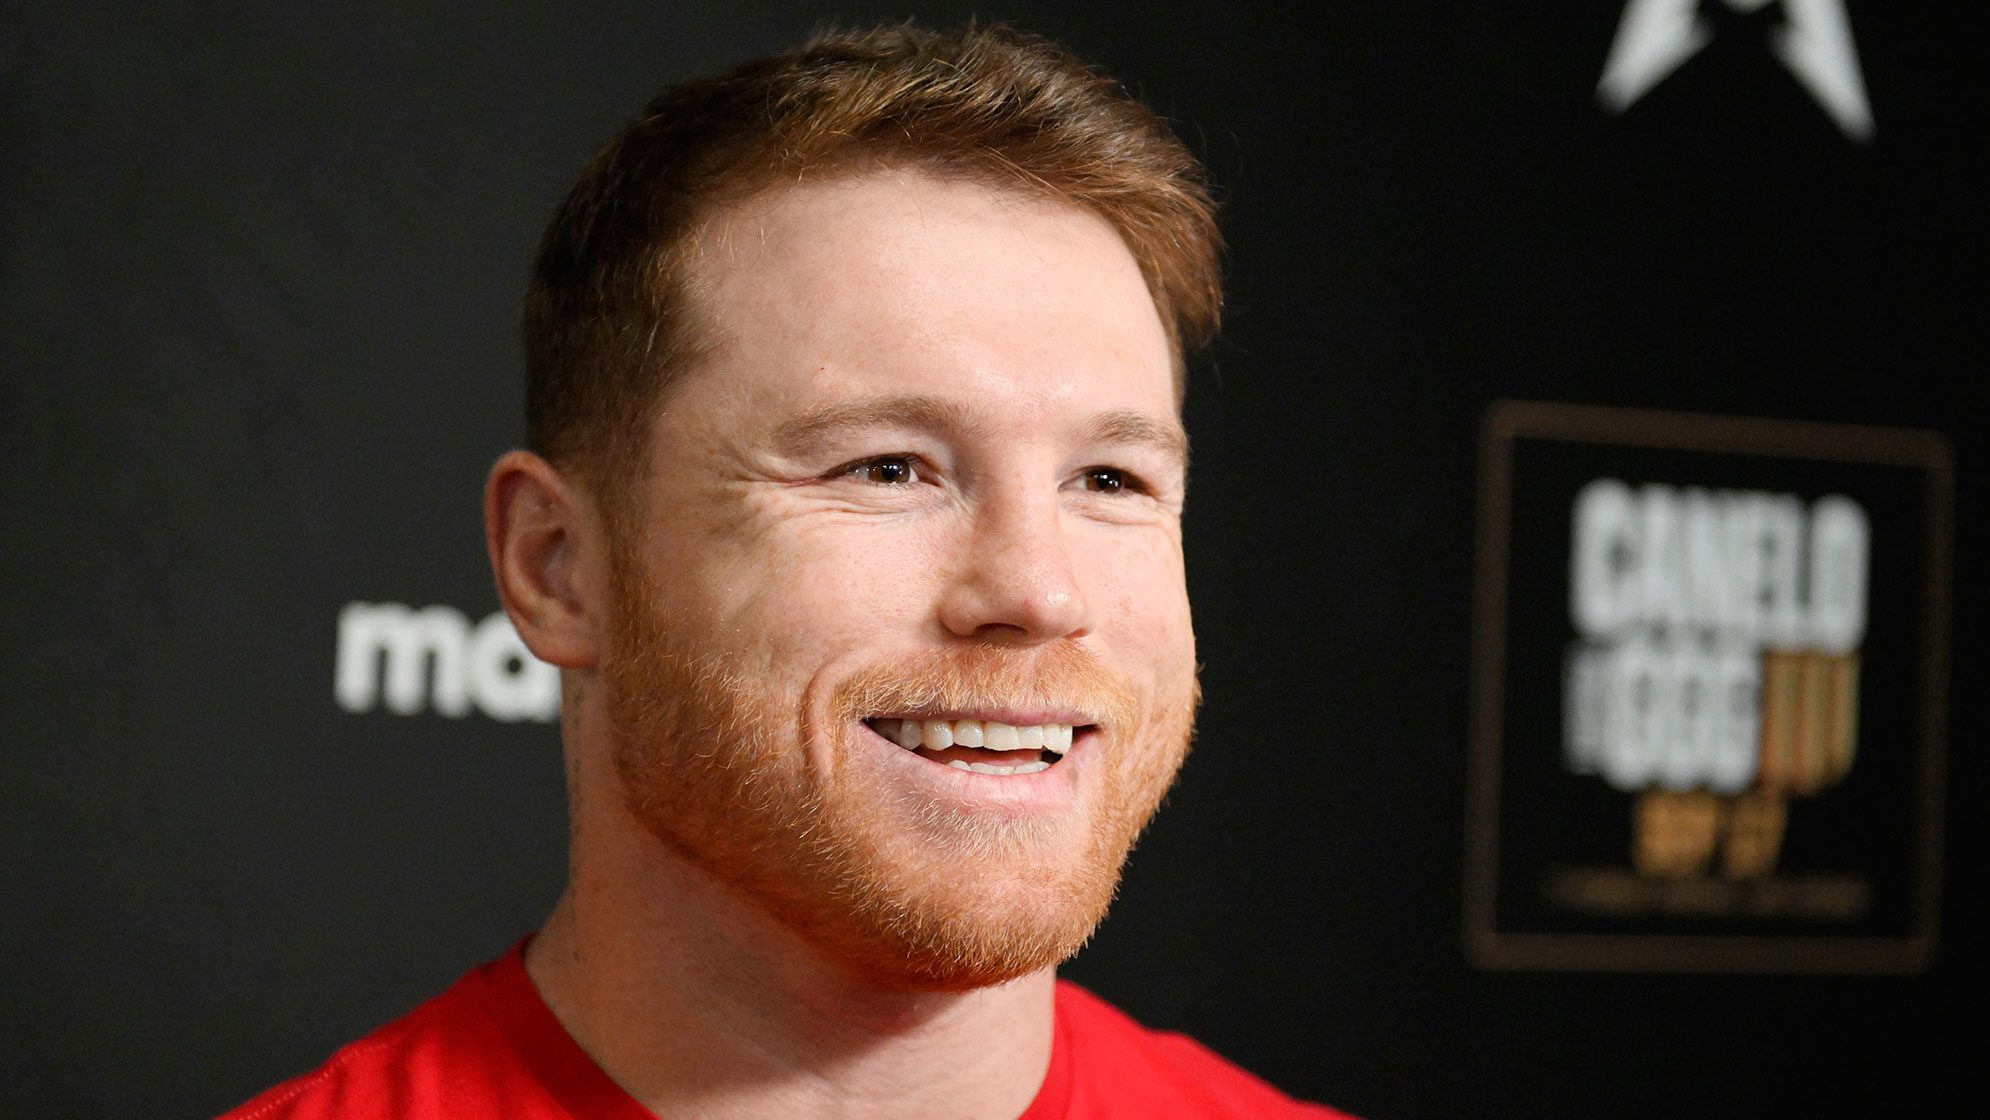 Saúl "Canelo" Álvarez reveals what has changed in four years since his